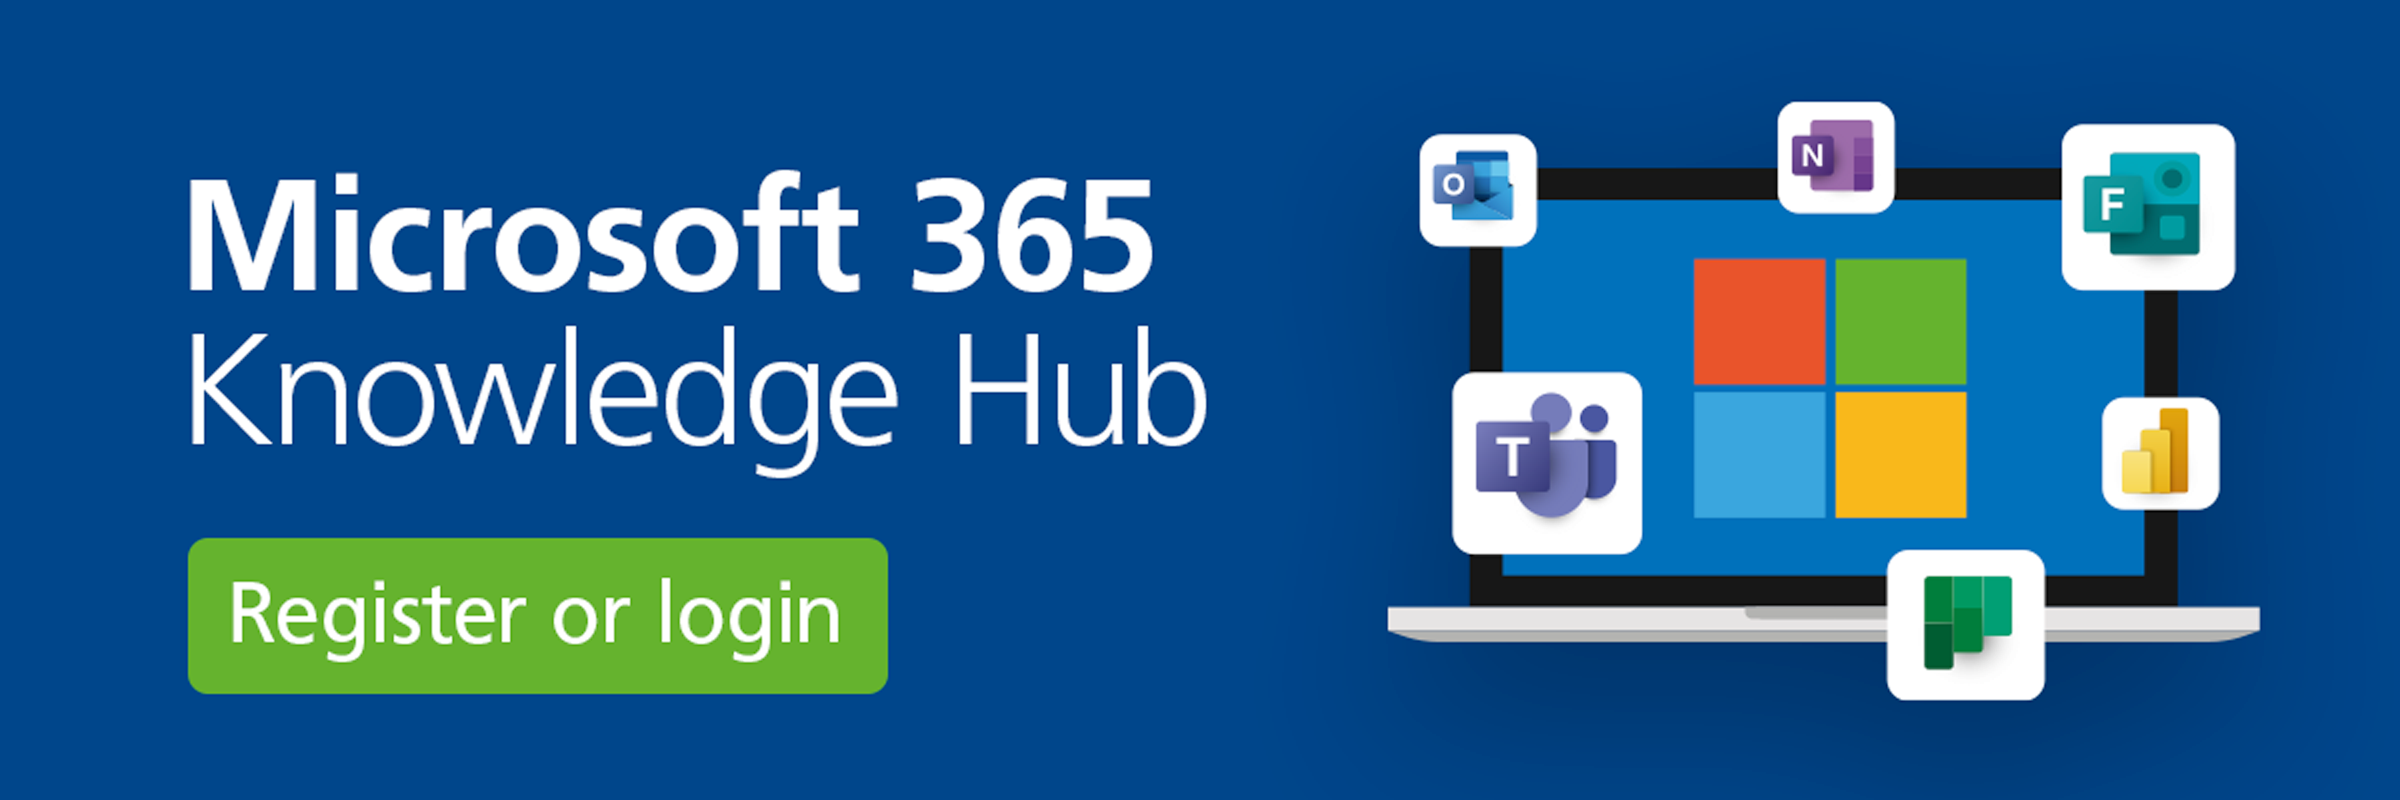 Microsoft Knowledge Hub - Register or login by clicking this image